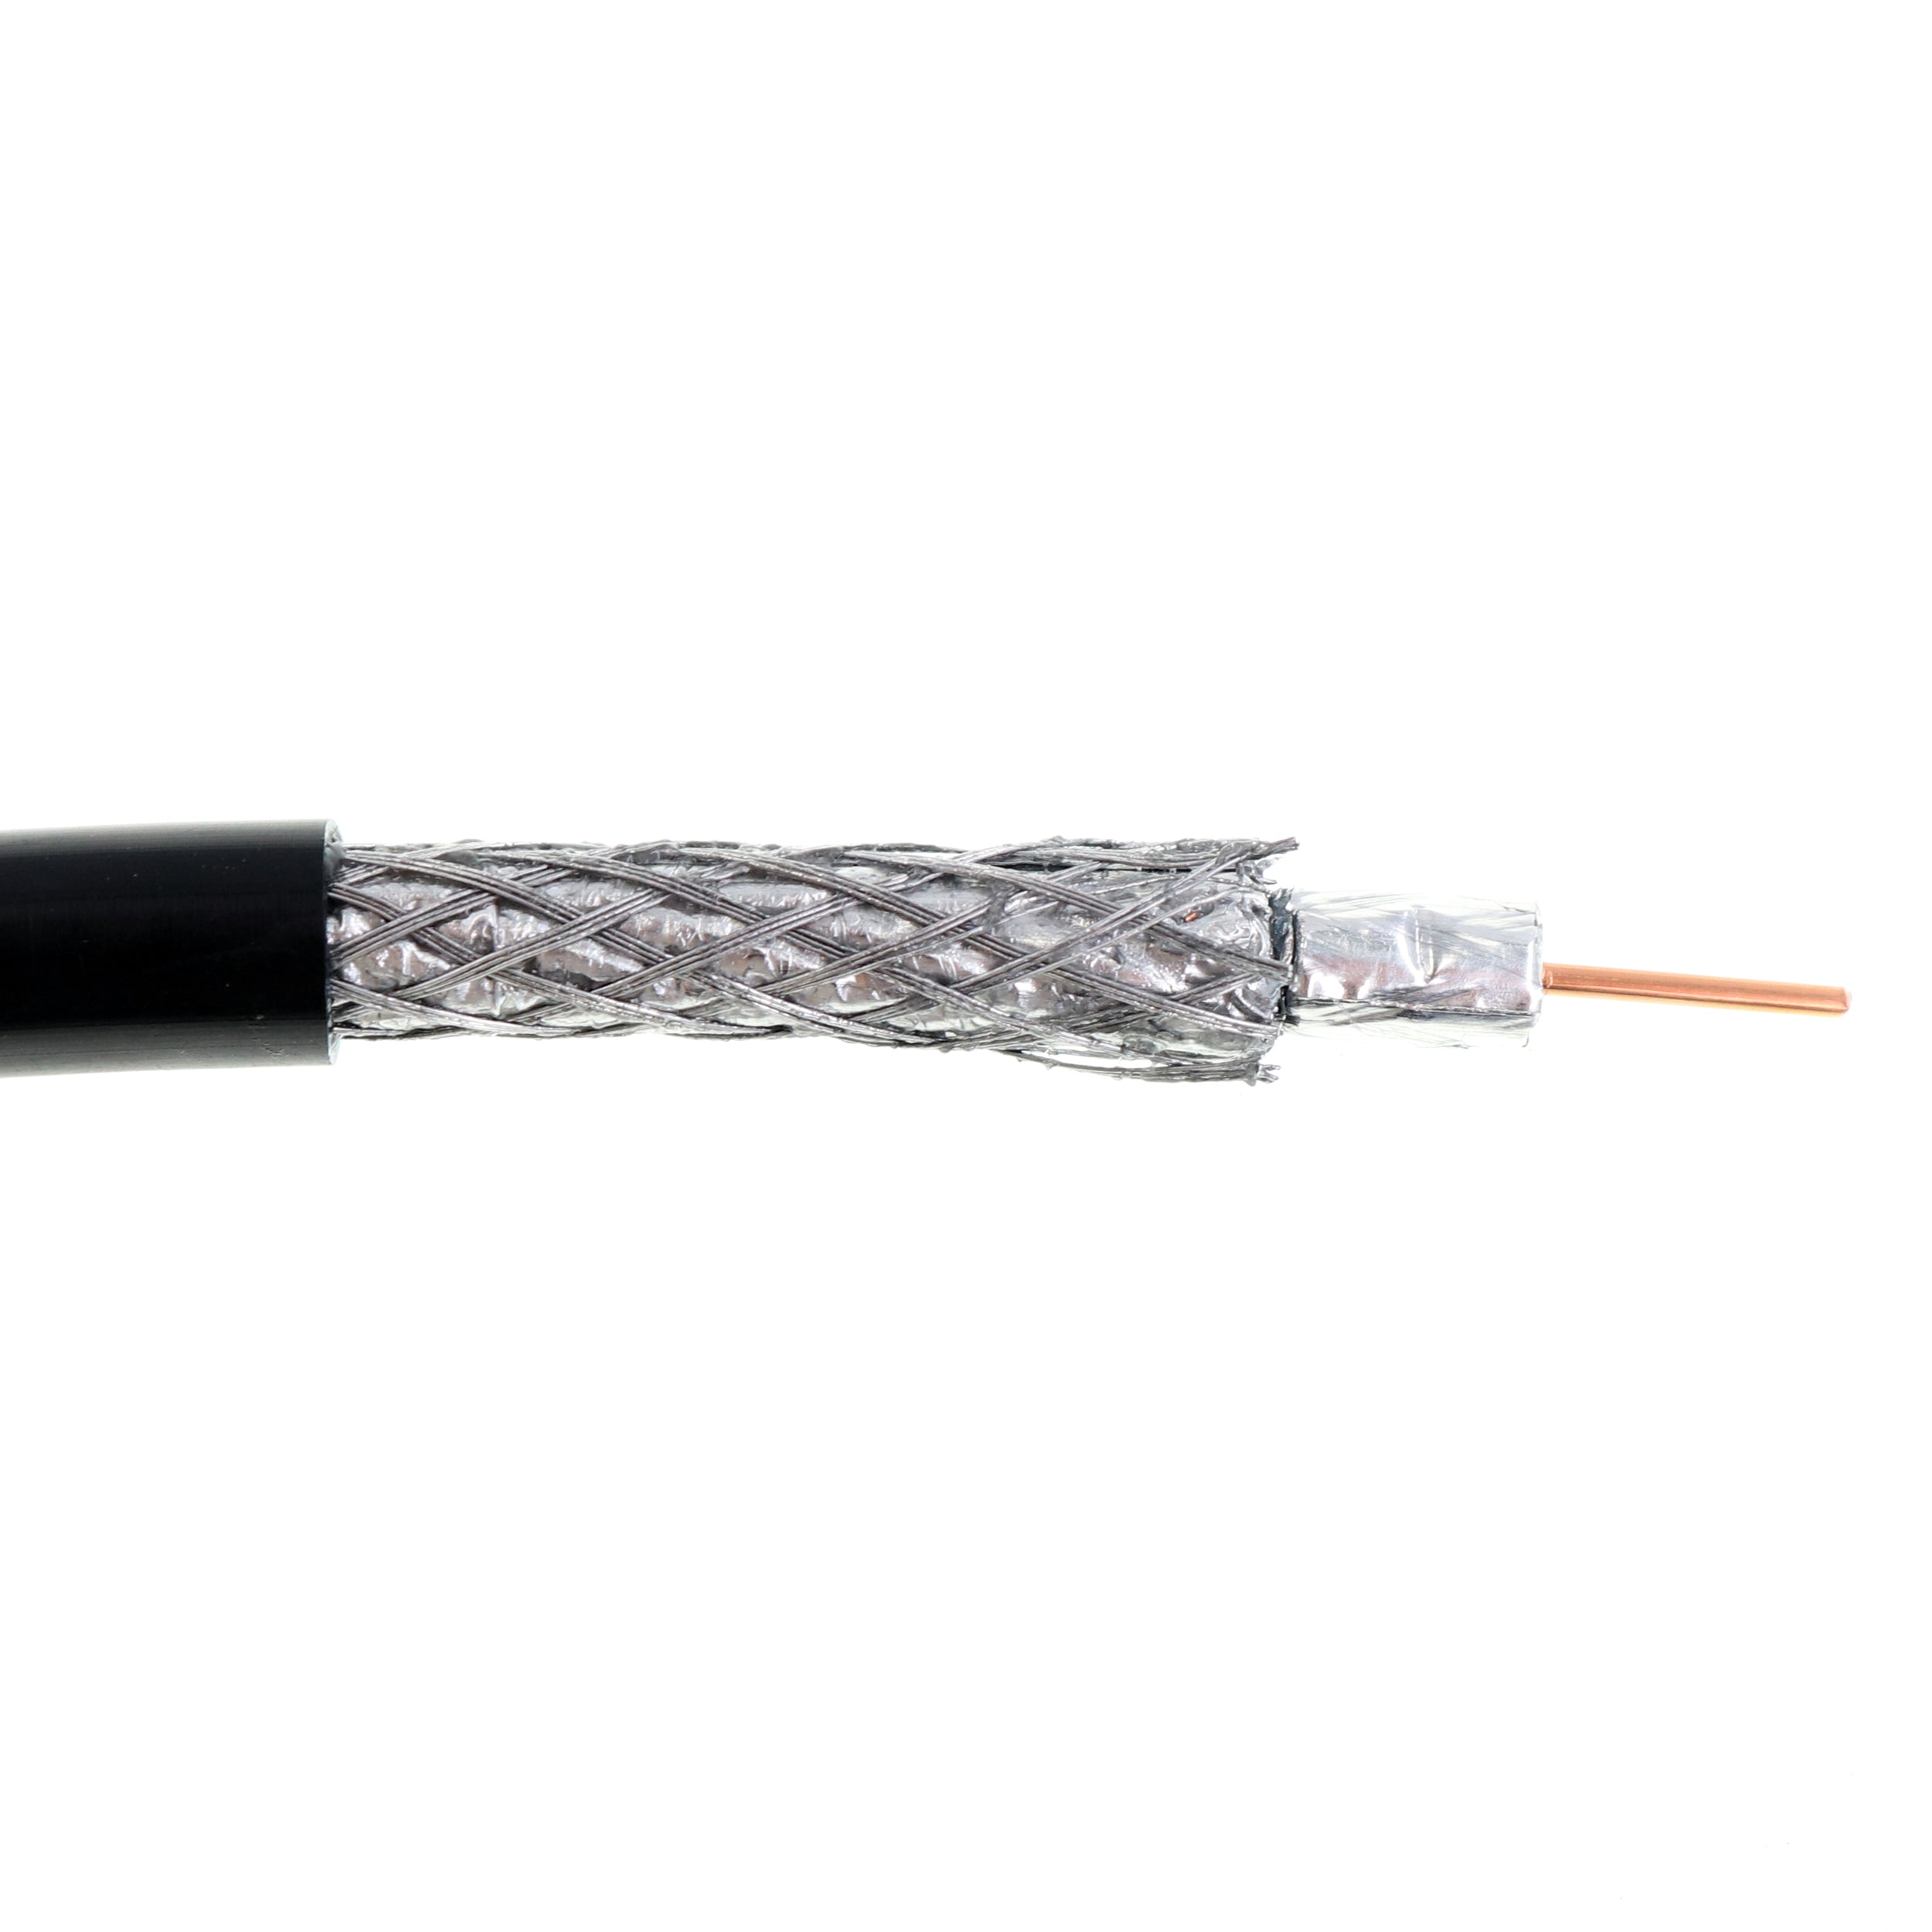 Commscope, COMMSCOPE 4813804 F6SSEF FLOODED RG6Q QUAD SHIELD COAX DROP CABLE, 18AWG BC, 100